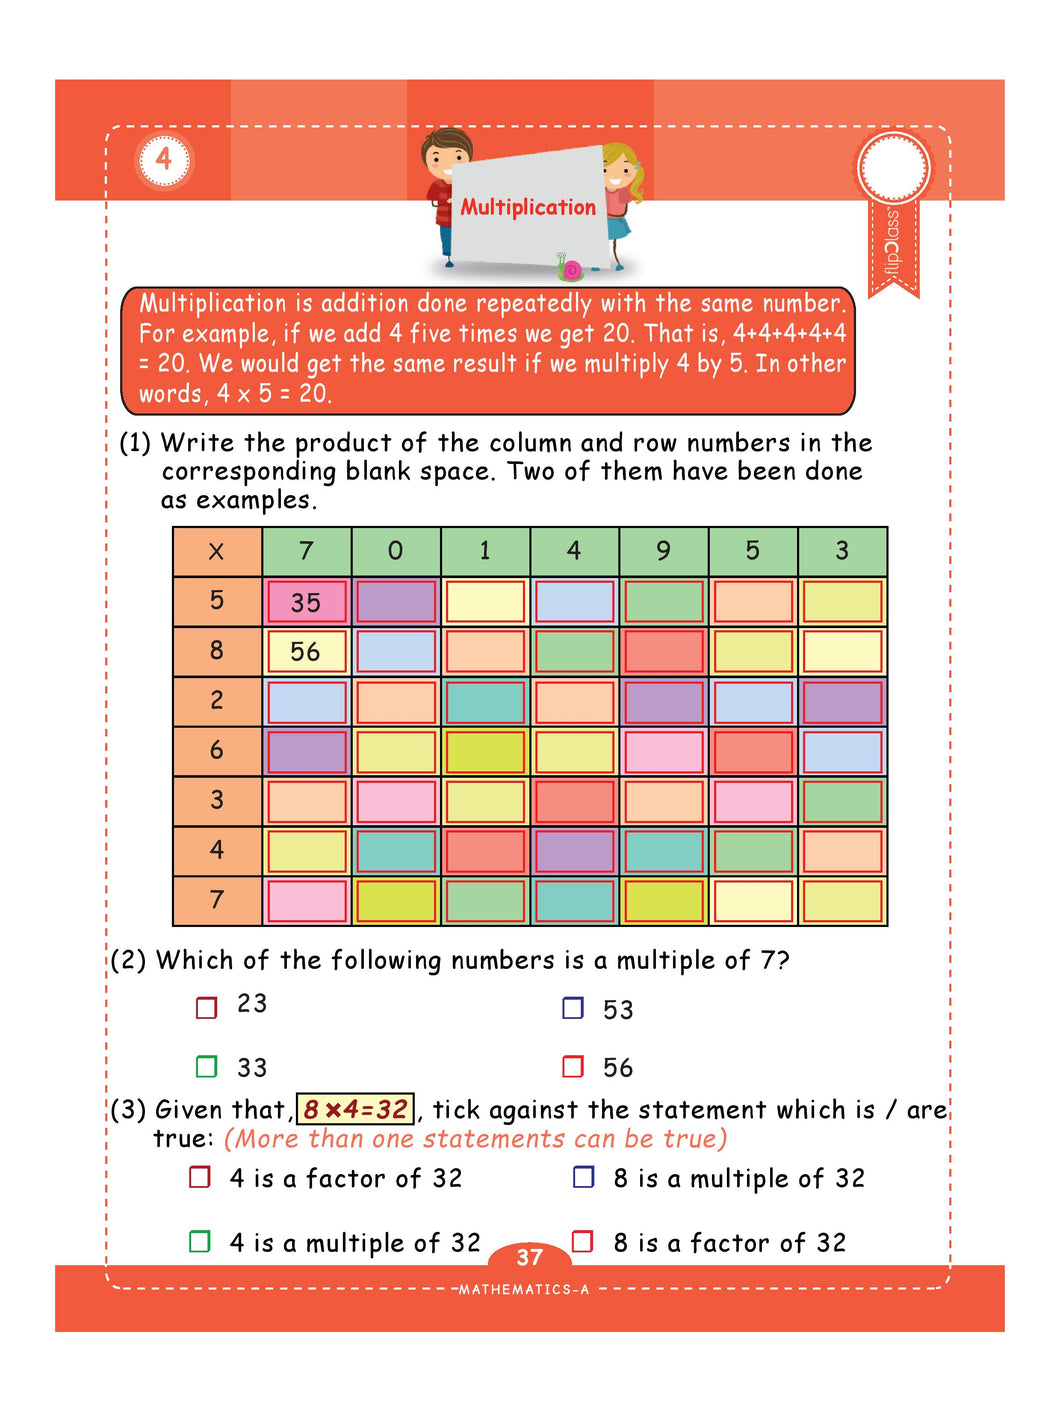 Genius Kids Worksheets for Class 4 (4th Grade) | Math, English